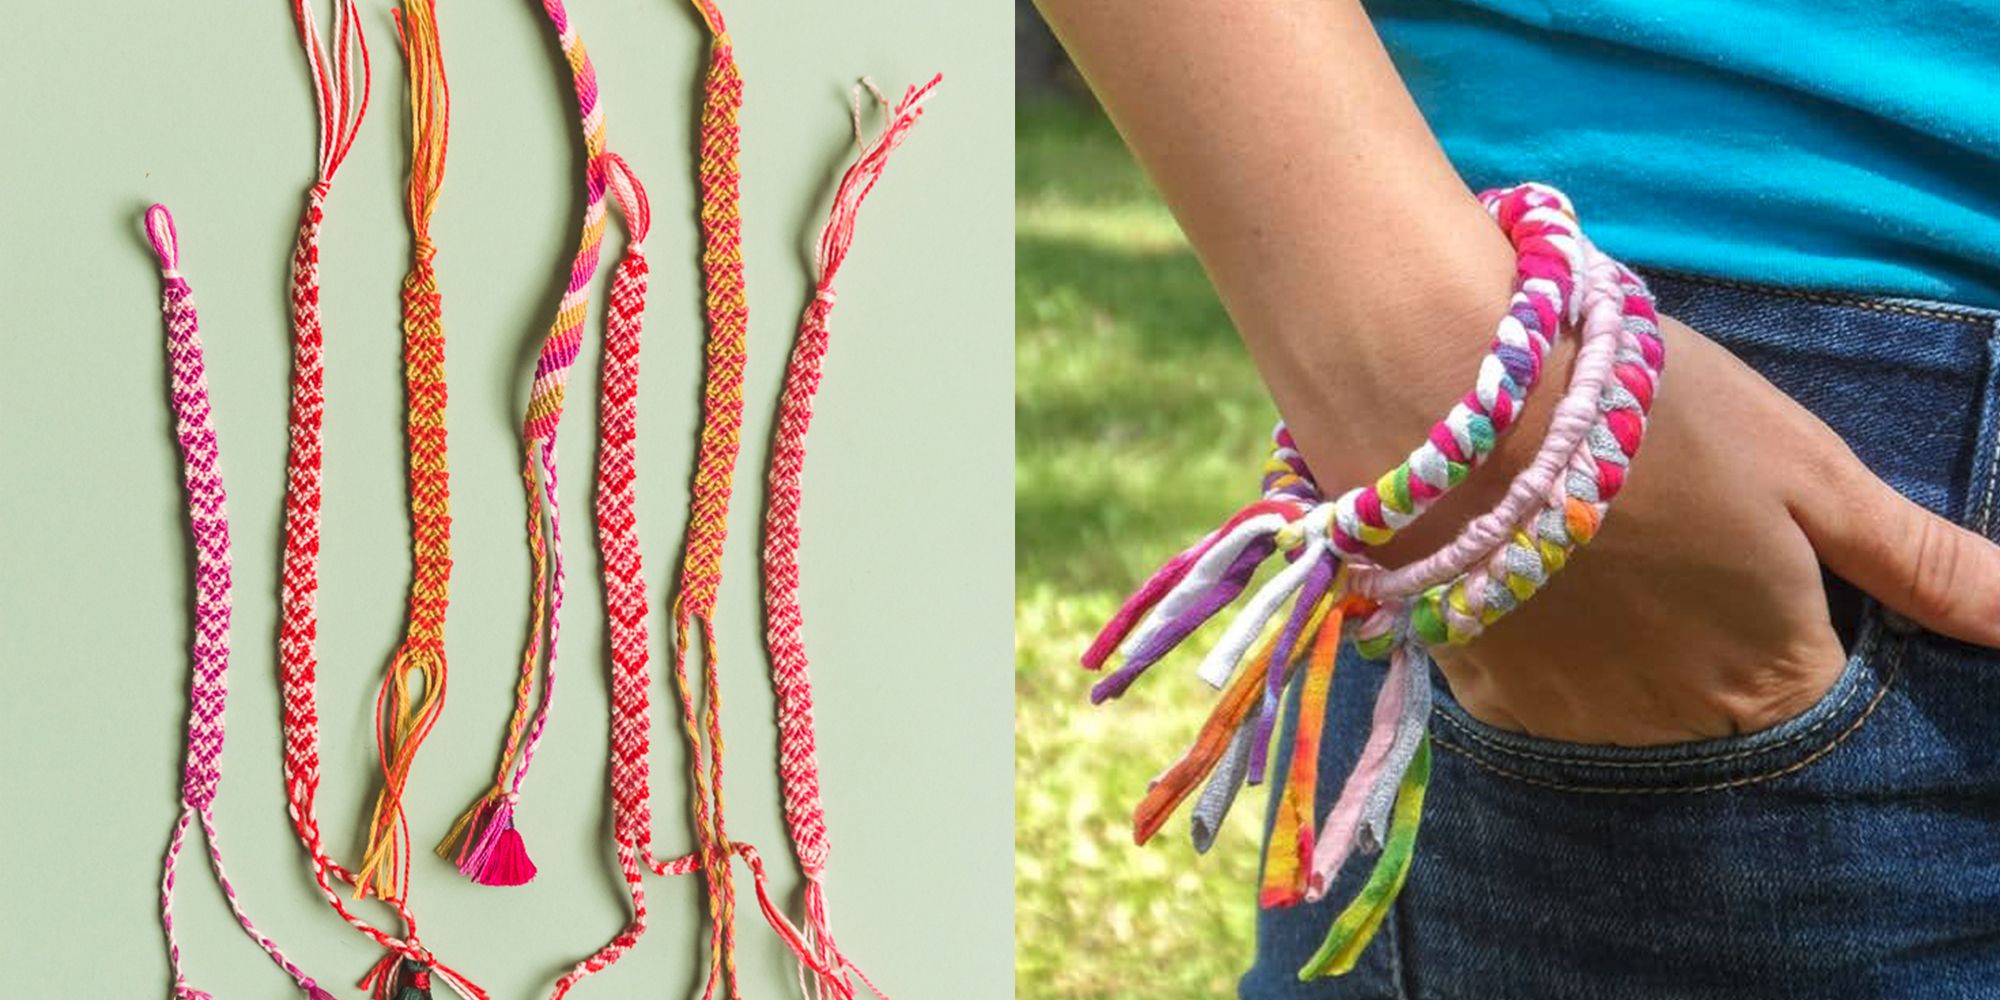 How To Make Rubber Band Bracelets • Kids Activities Blog